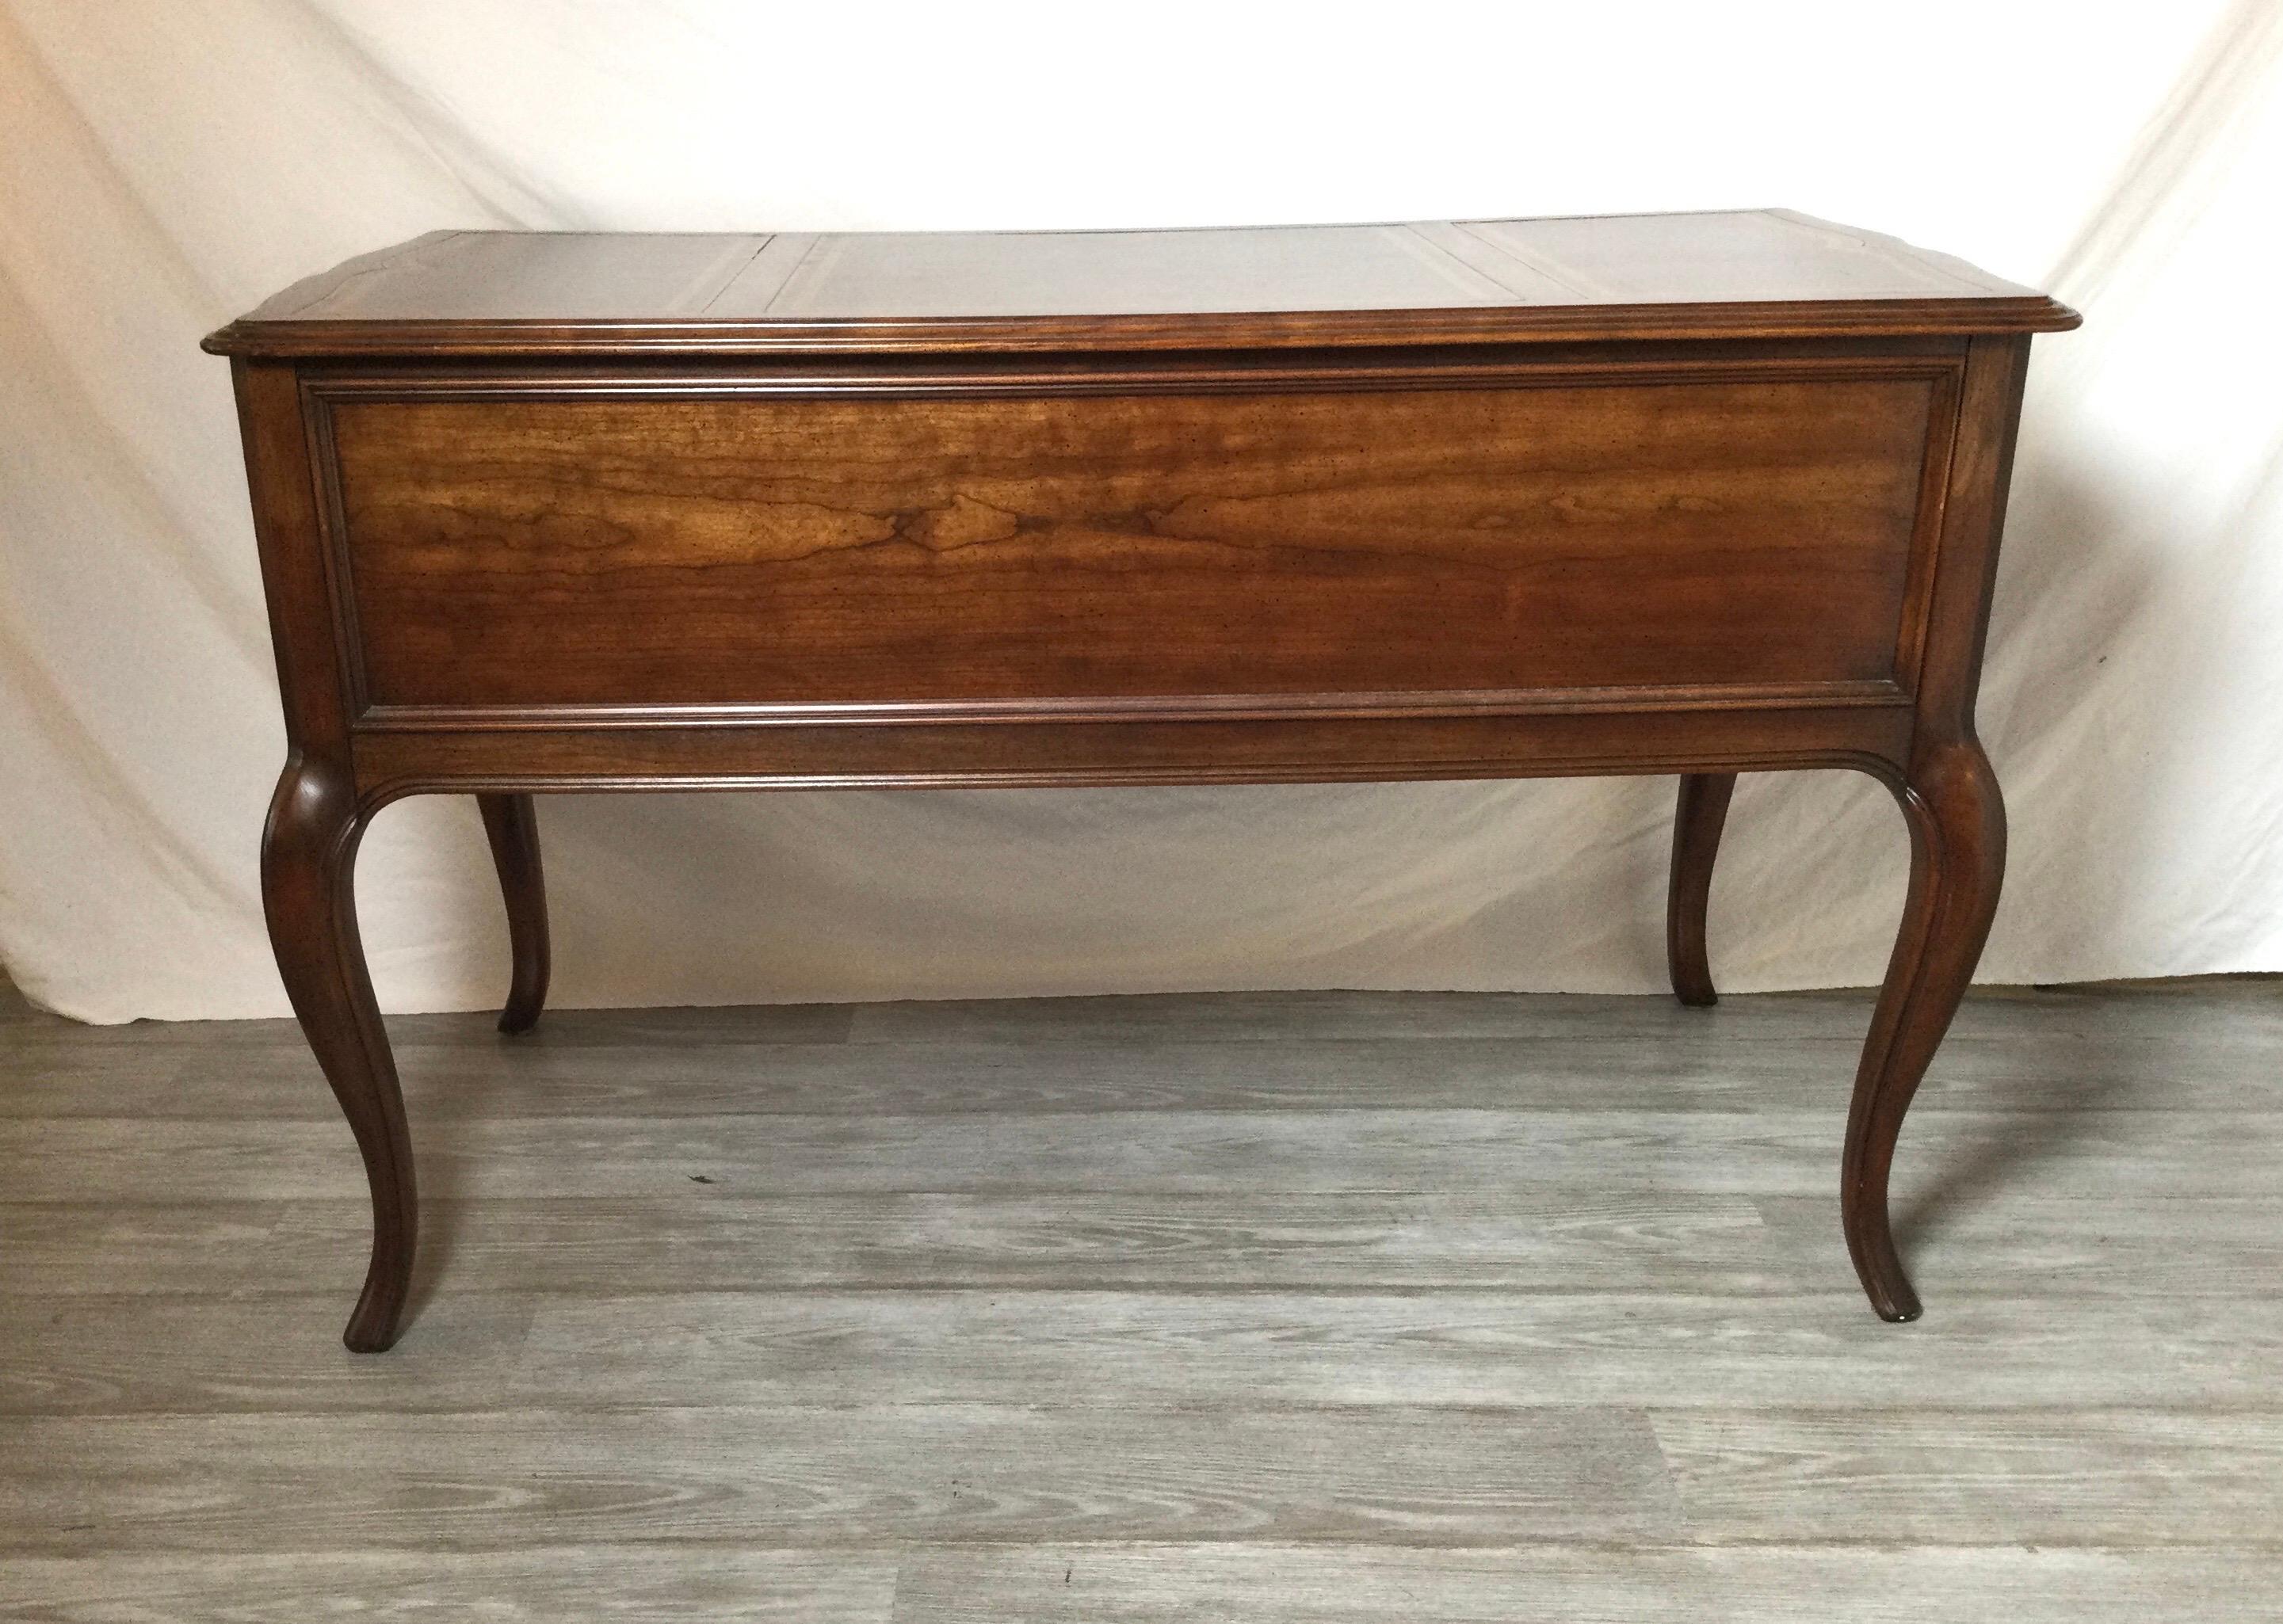 Circa 1960's Mid-Century Leather Top Walnut Desk by Sligh Furniture Co. Chicago For Sale 1